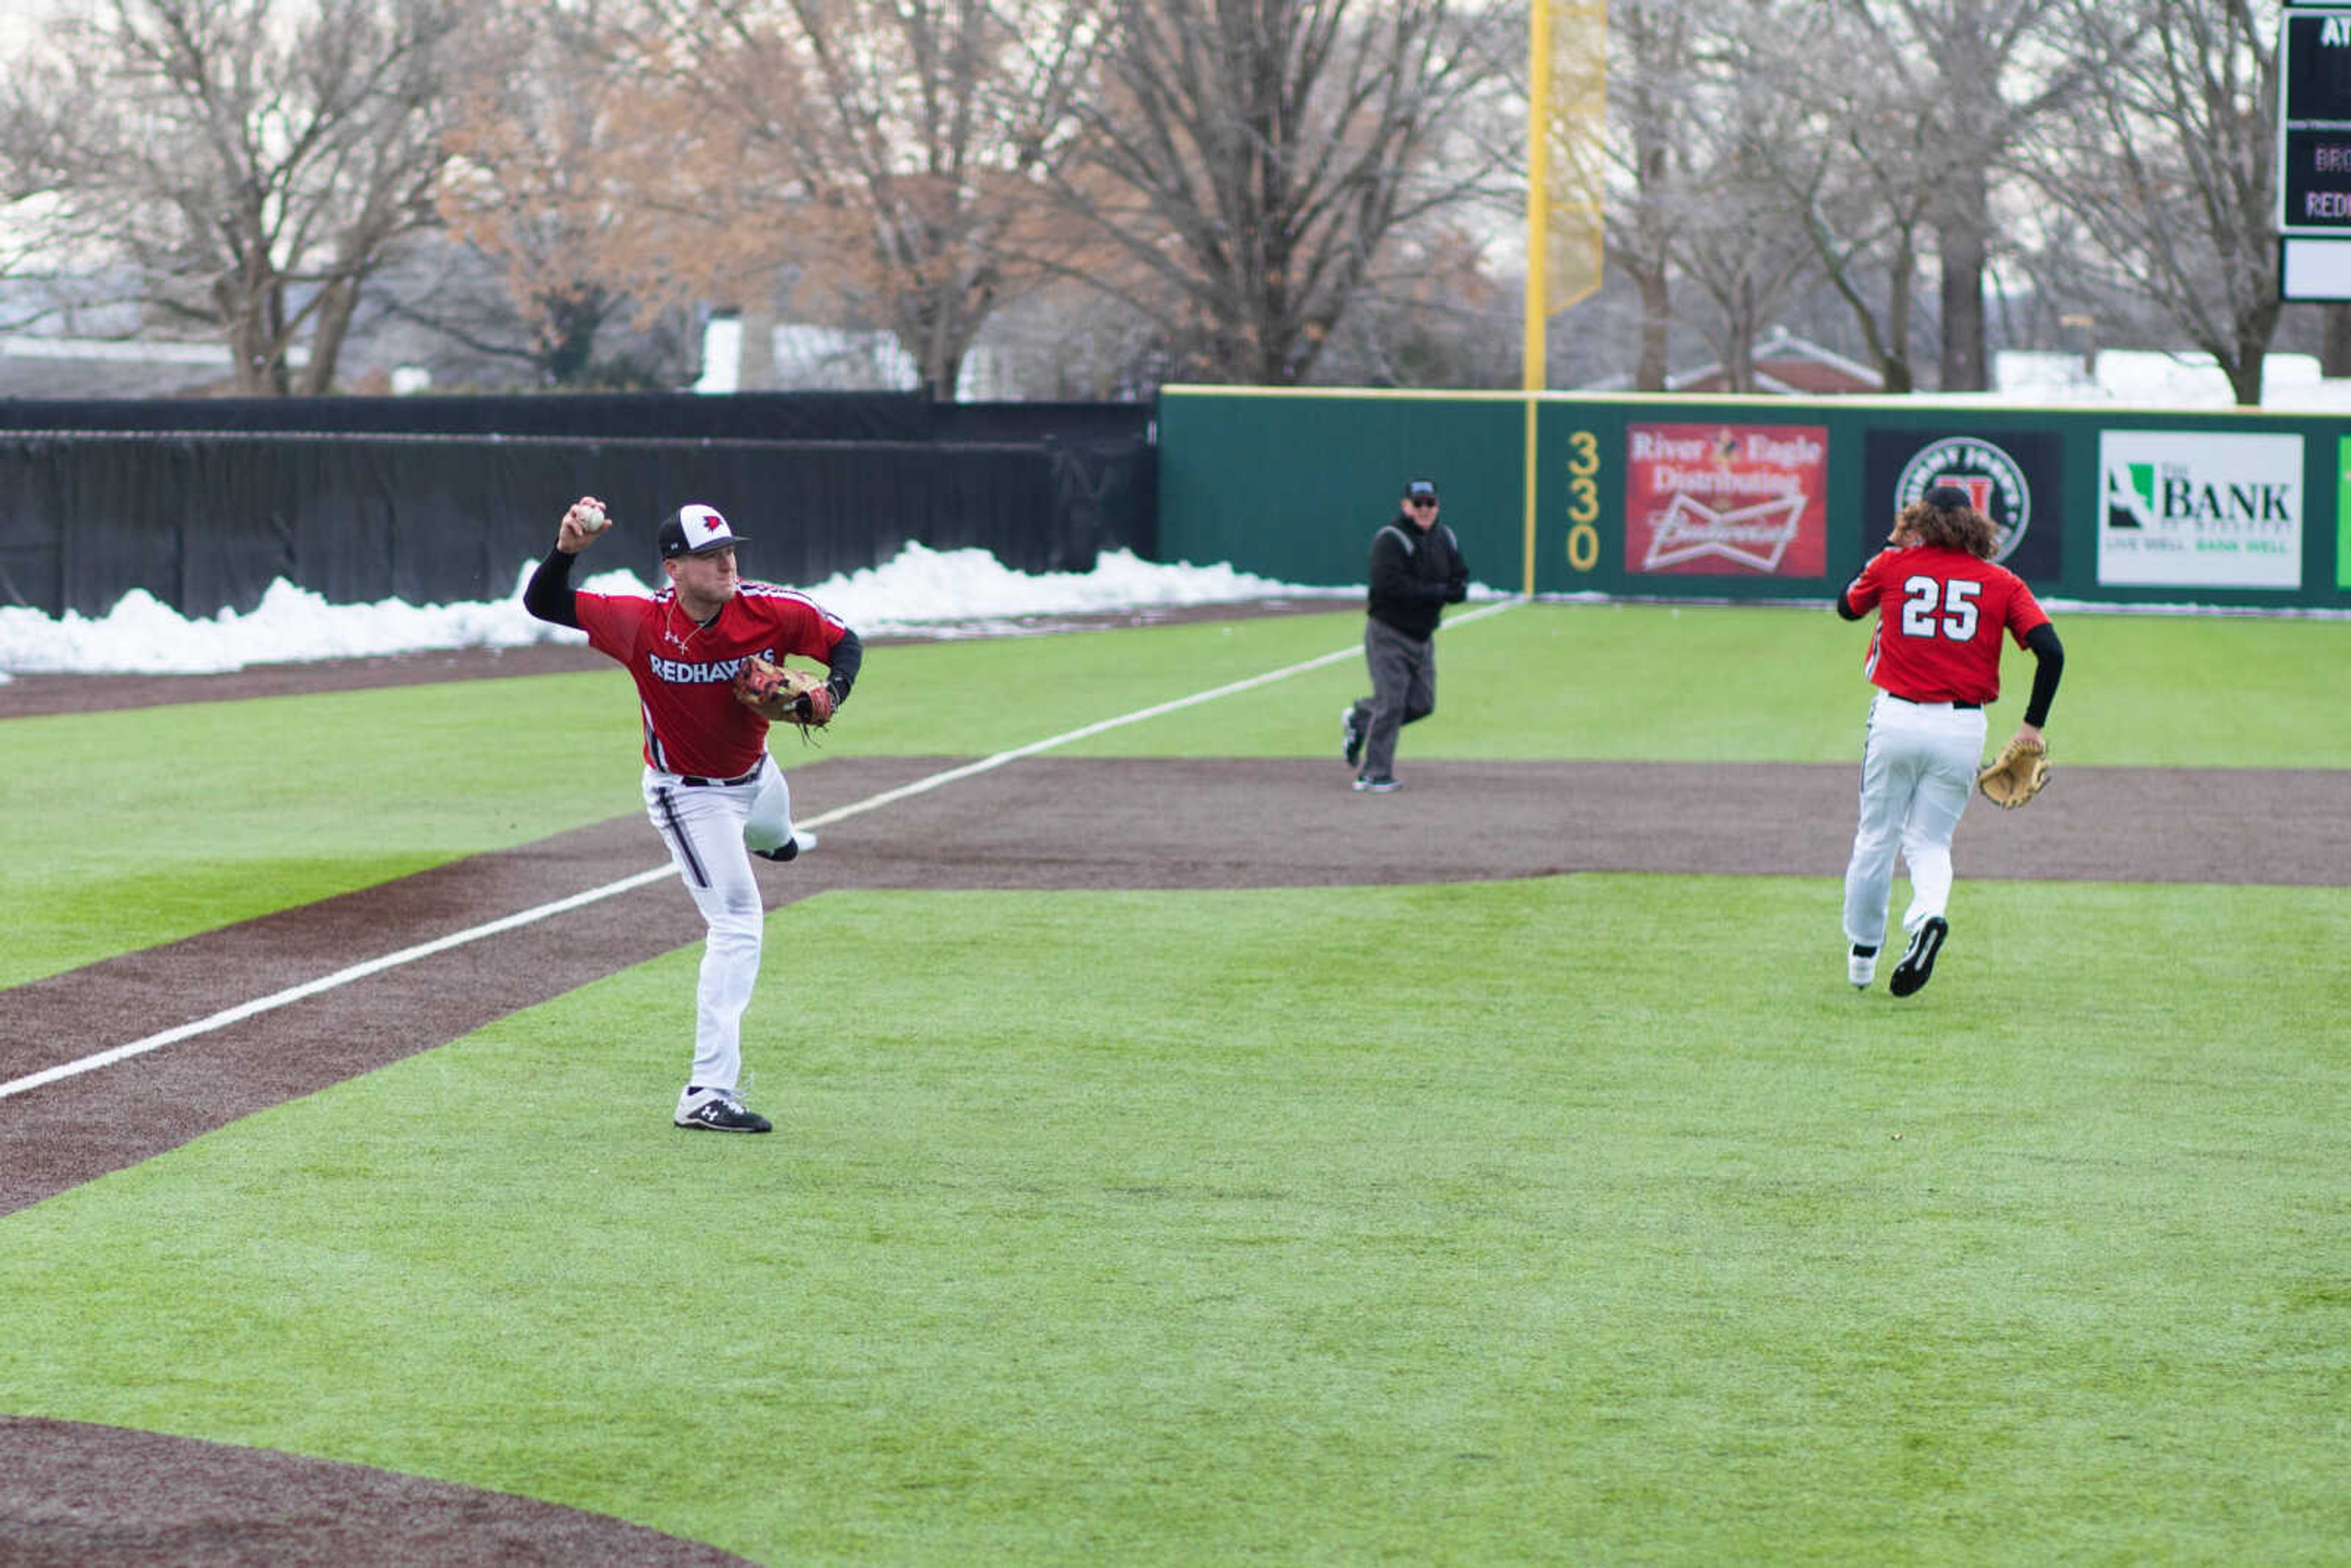 Senior third baseman Alex Nielsen throws across the infield to make an out against Western Michigan on Saturday, Feb. 16 at Capaha Field.